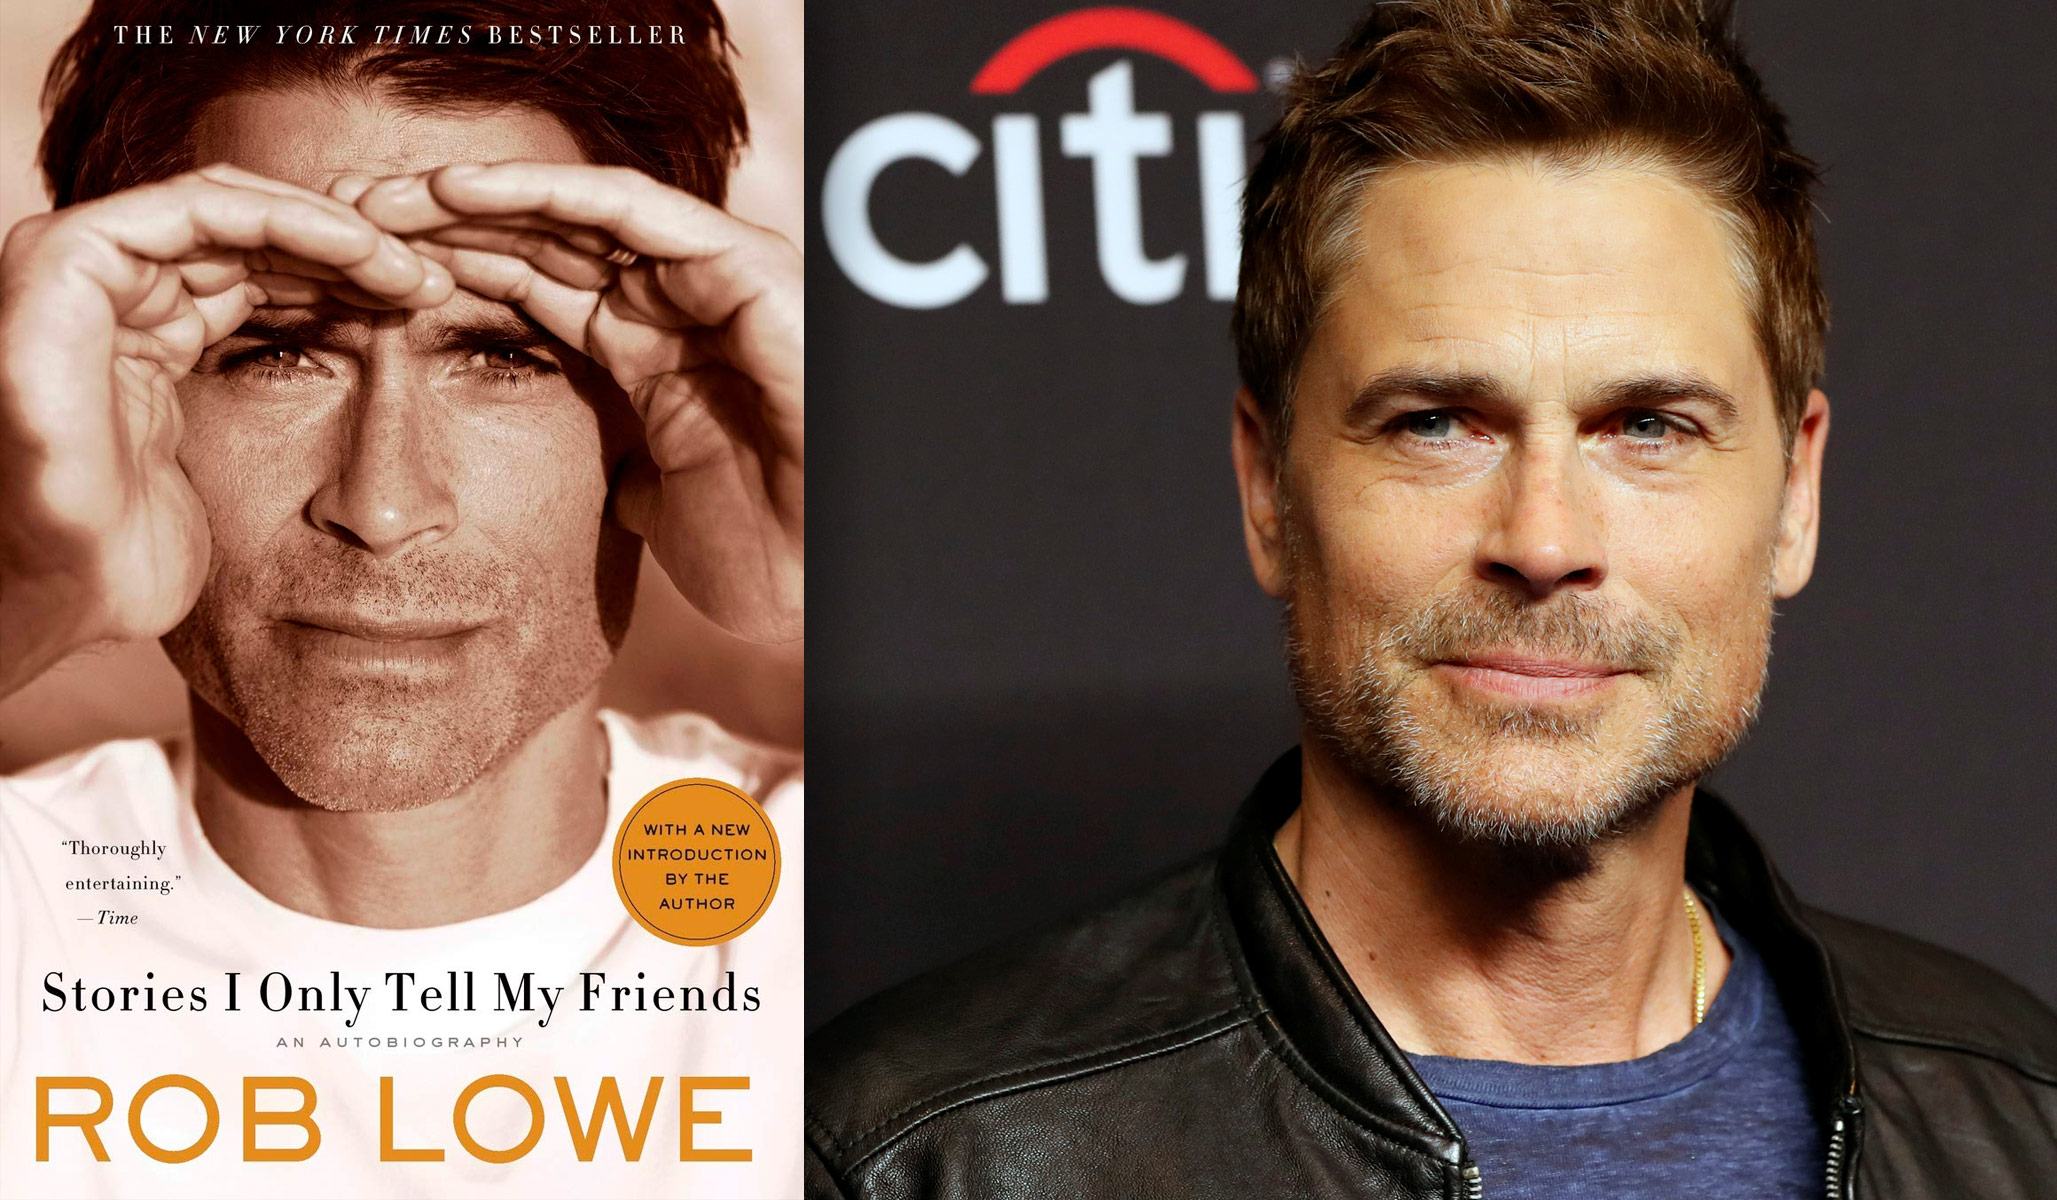 Hairy Teen Solo Girl - Rob Lowe's Hollywood Memoir Delivers Spectacular Anecdotes | National Review